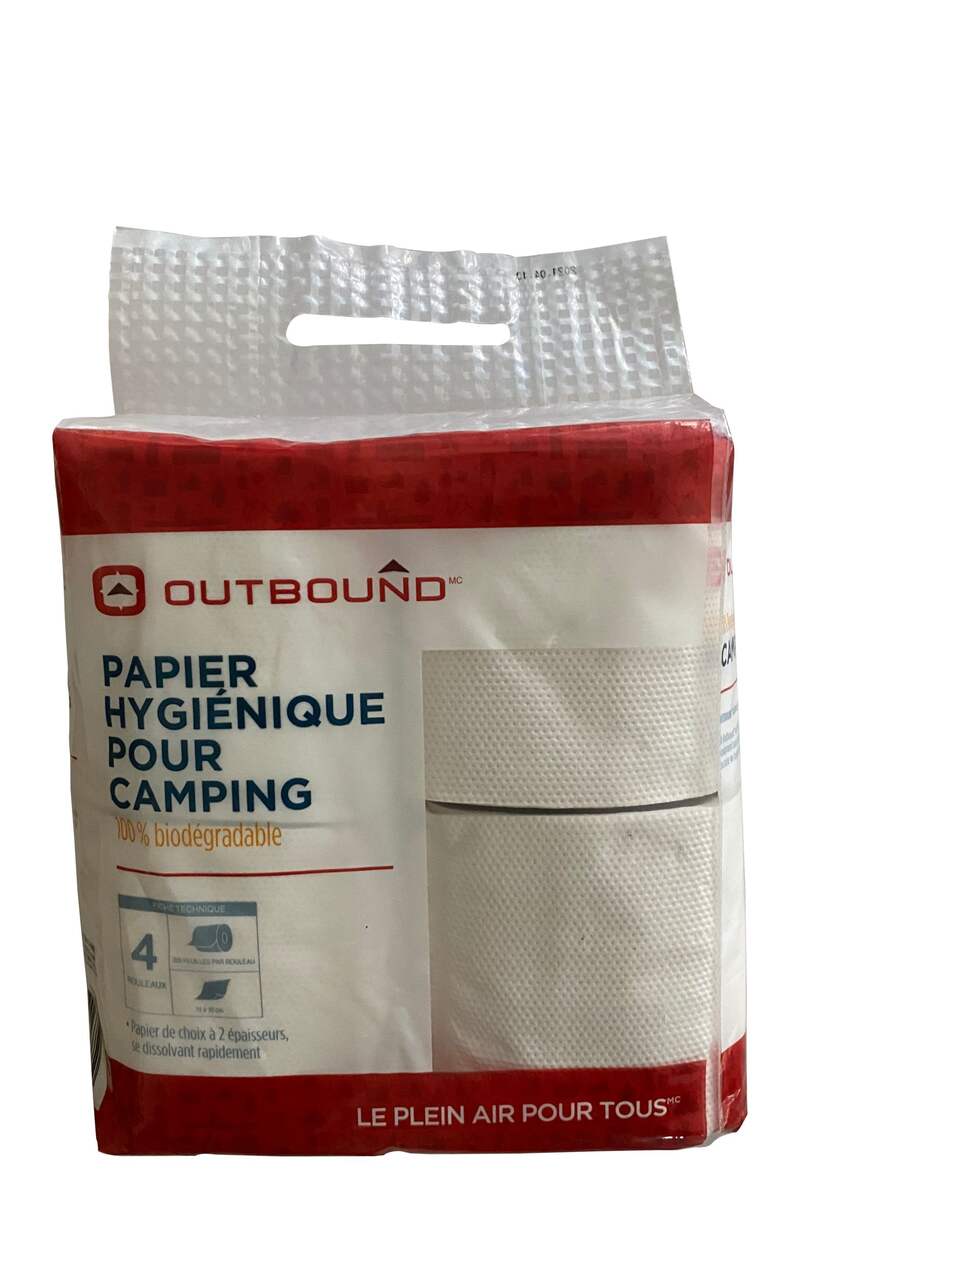 Outbound 100% Biodegradable 2-Ply Rapid Dissolve Camping Toilet Tissue Paper,  4-pk